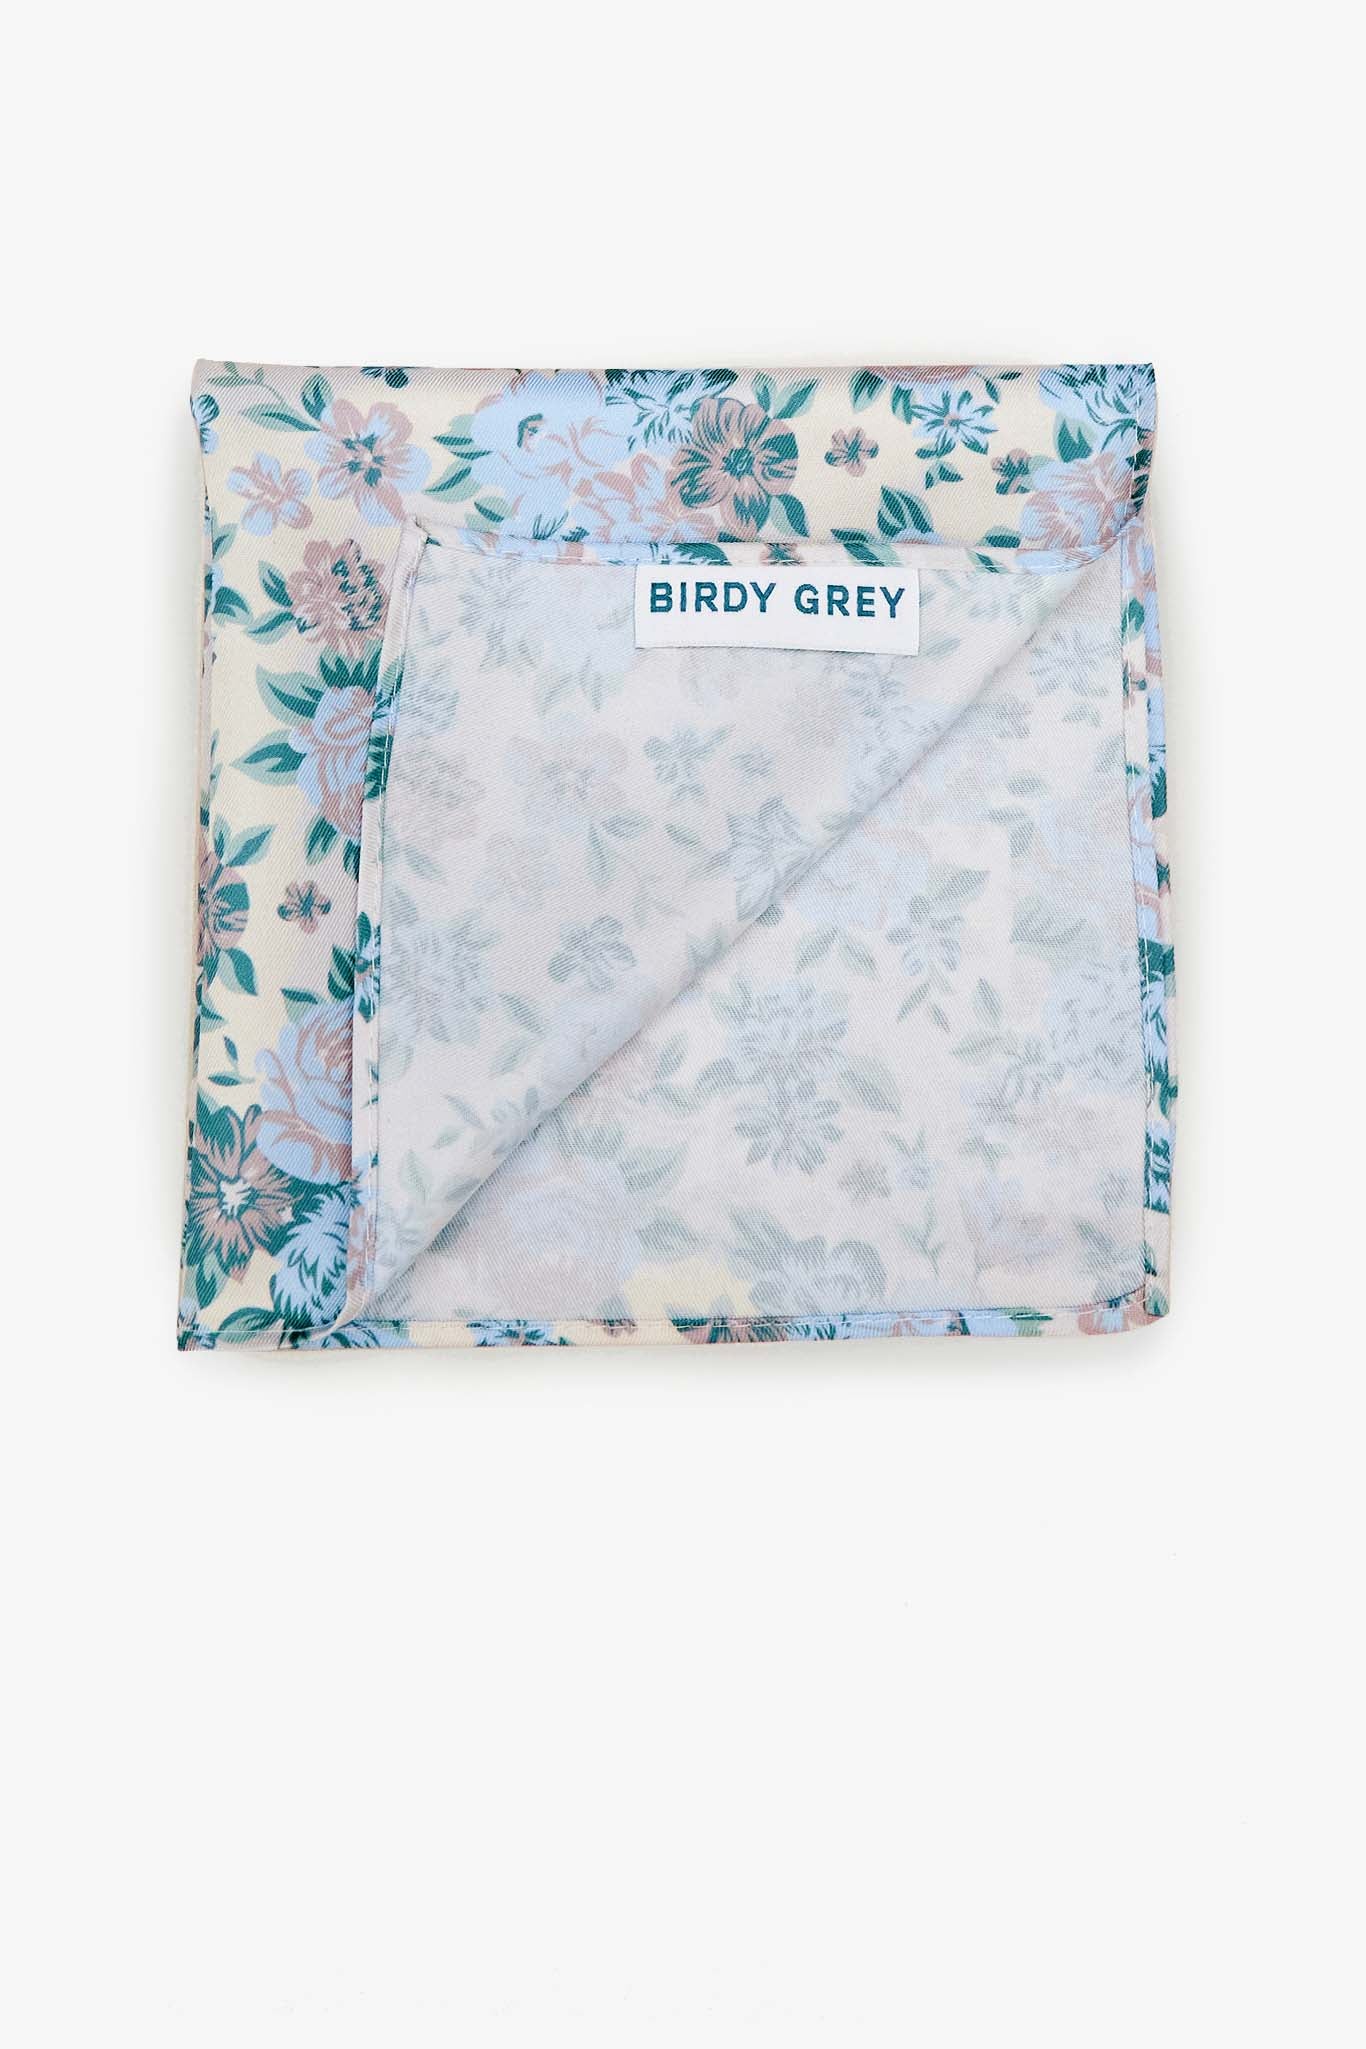 Didi Pocket Square in dusty blue floral by Birdy Grey, back view